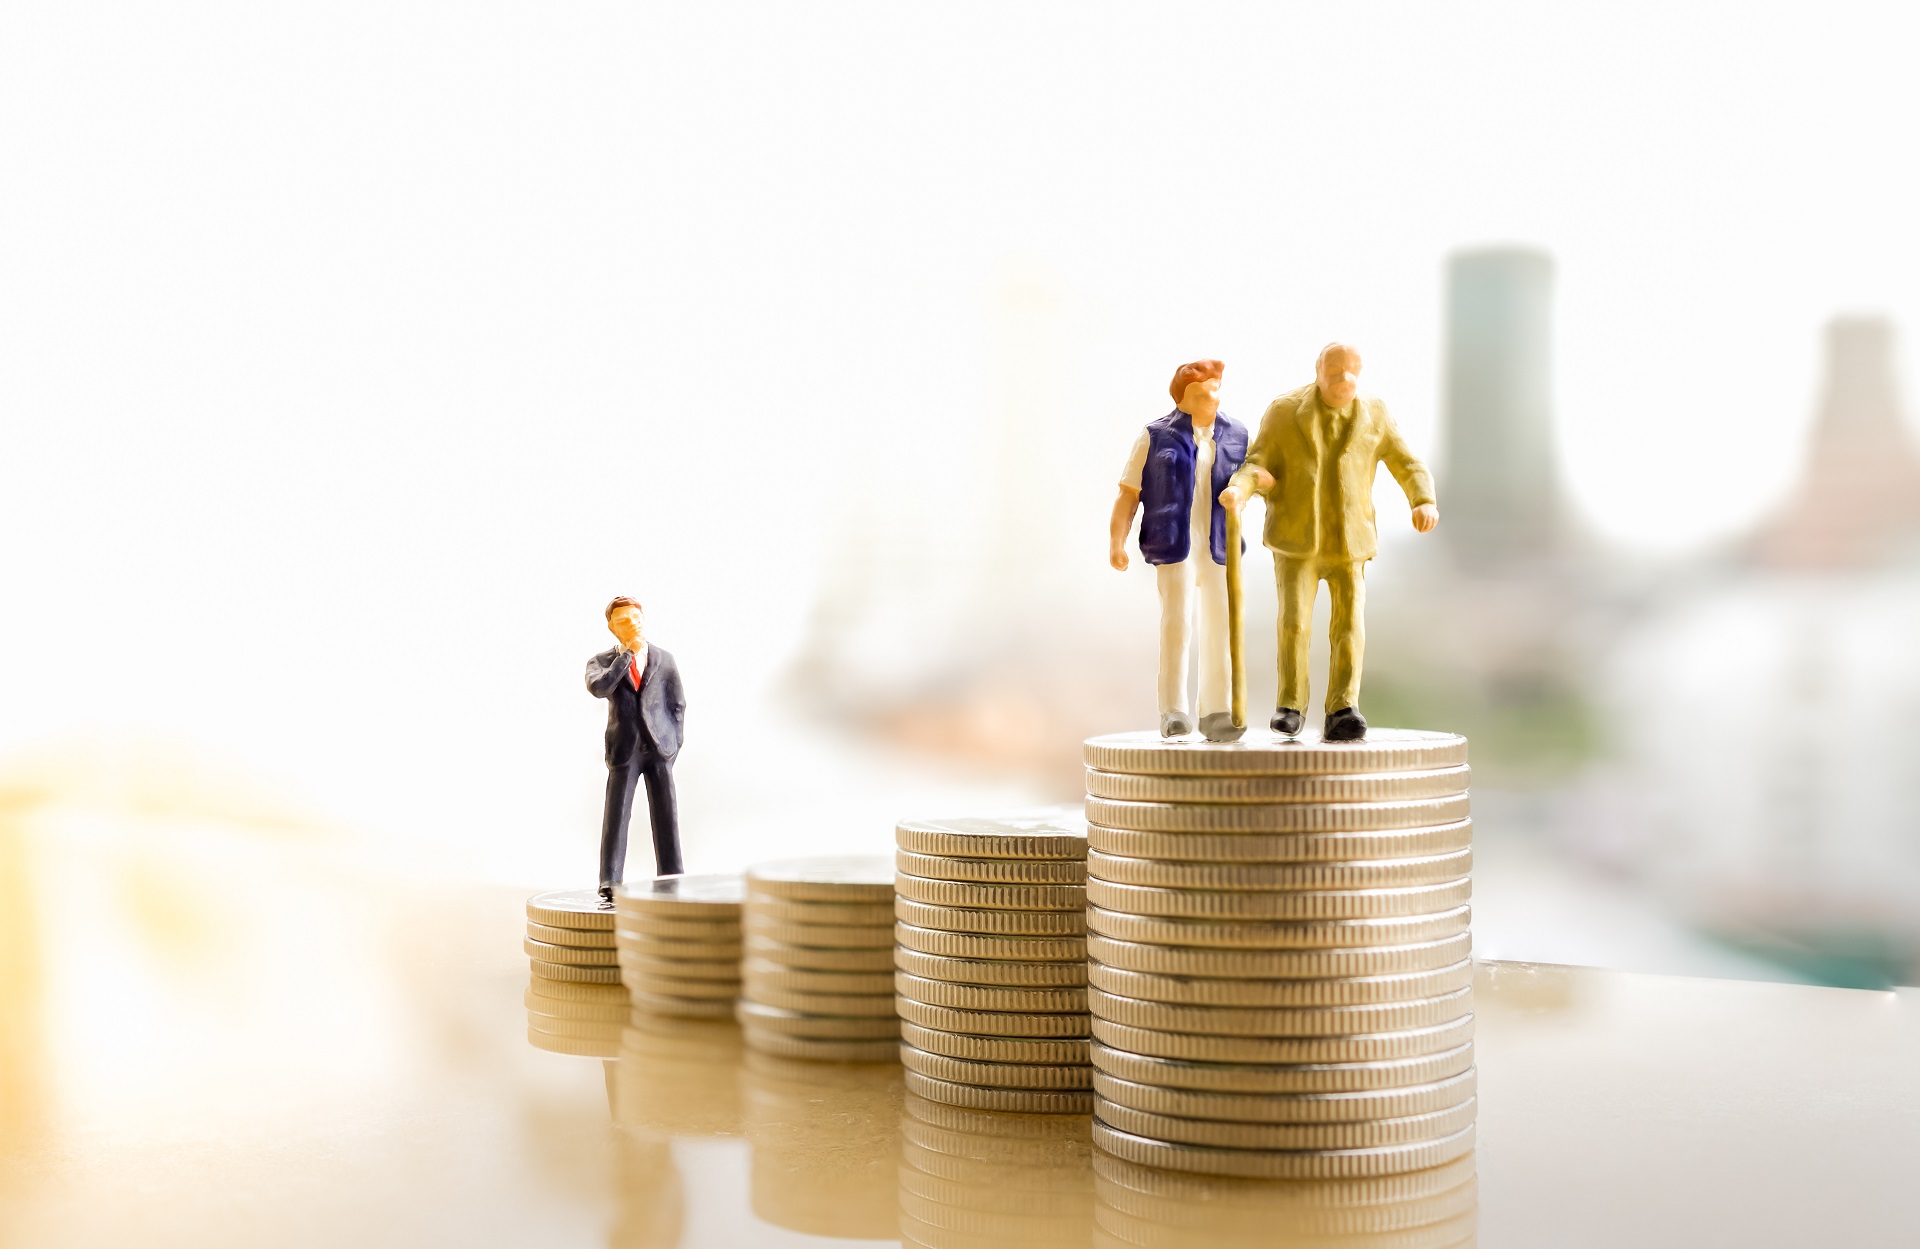 Miniature Figures on Coin Stacks | Estate Planning Law Firm | Legacy Law Group